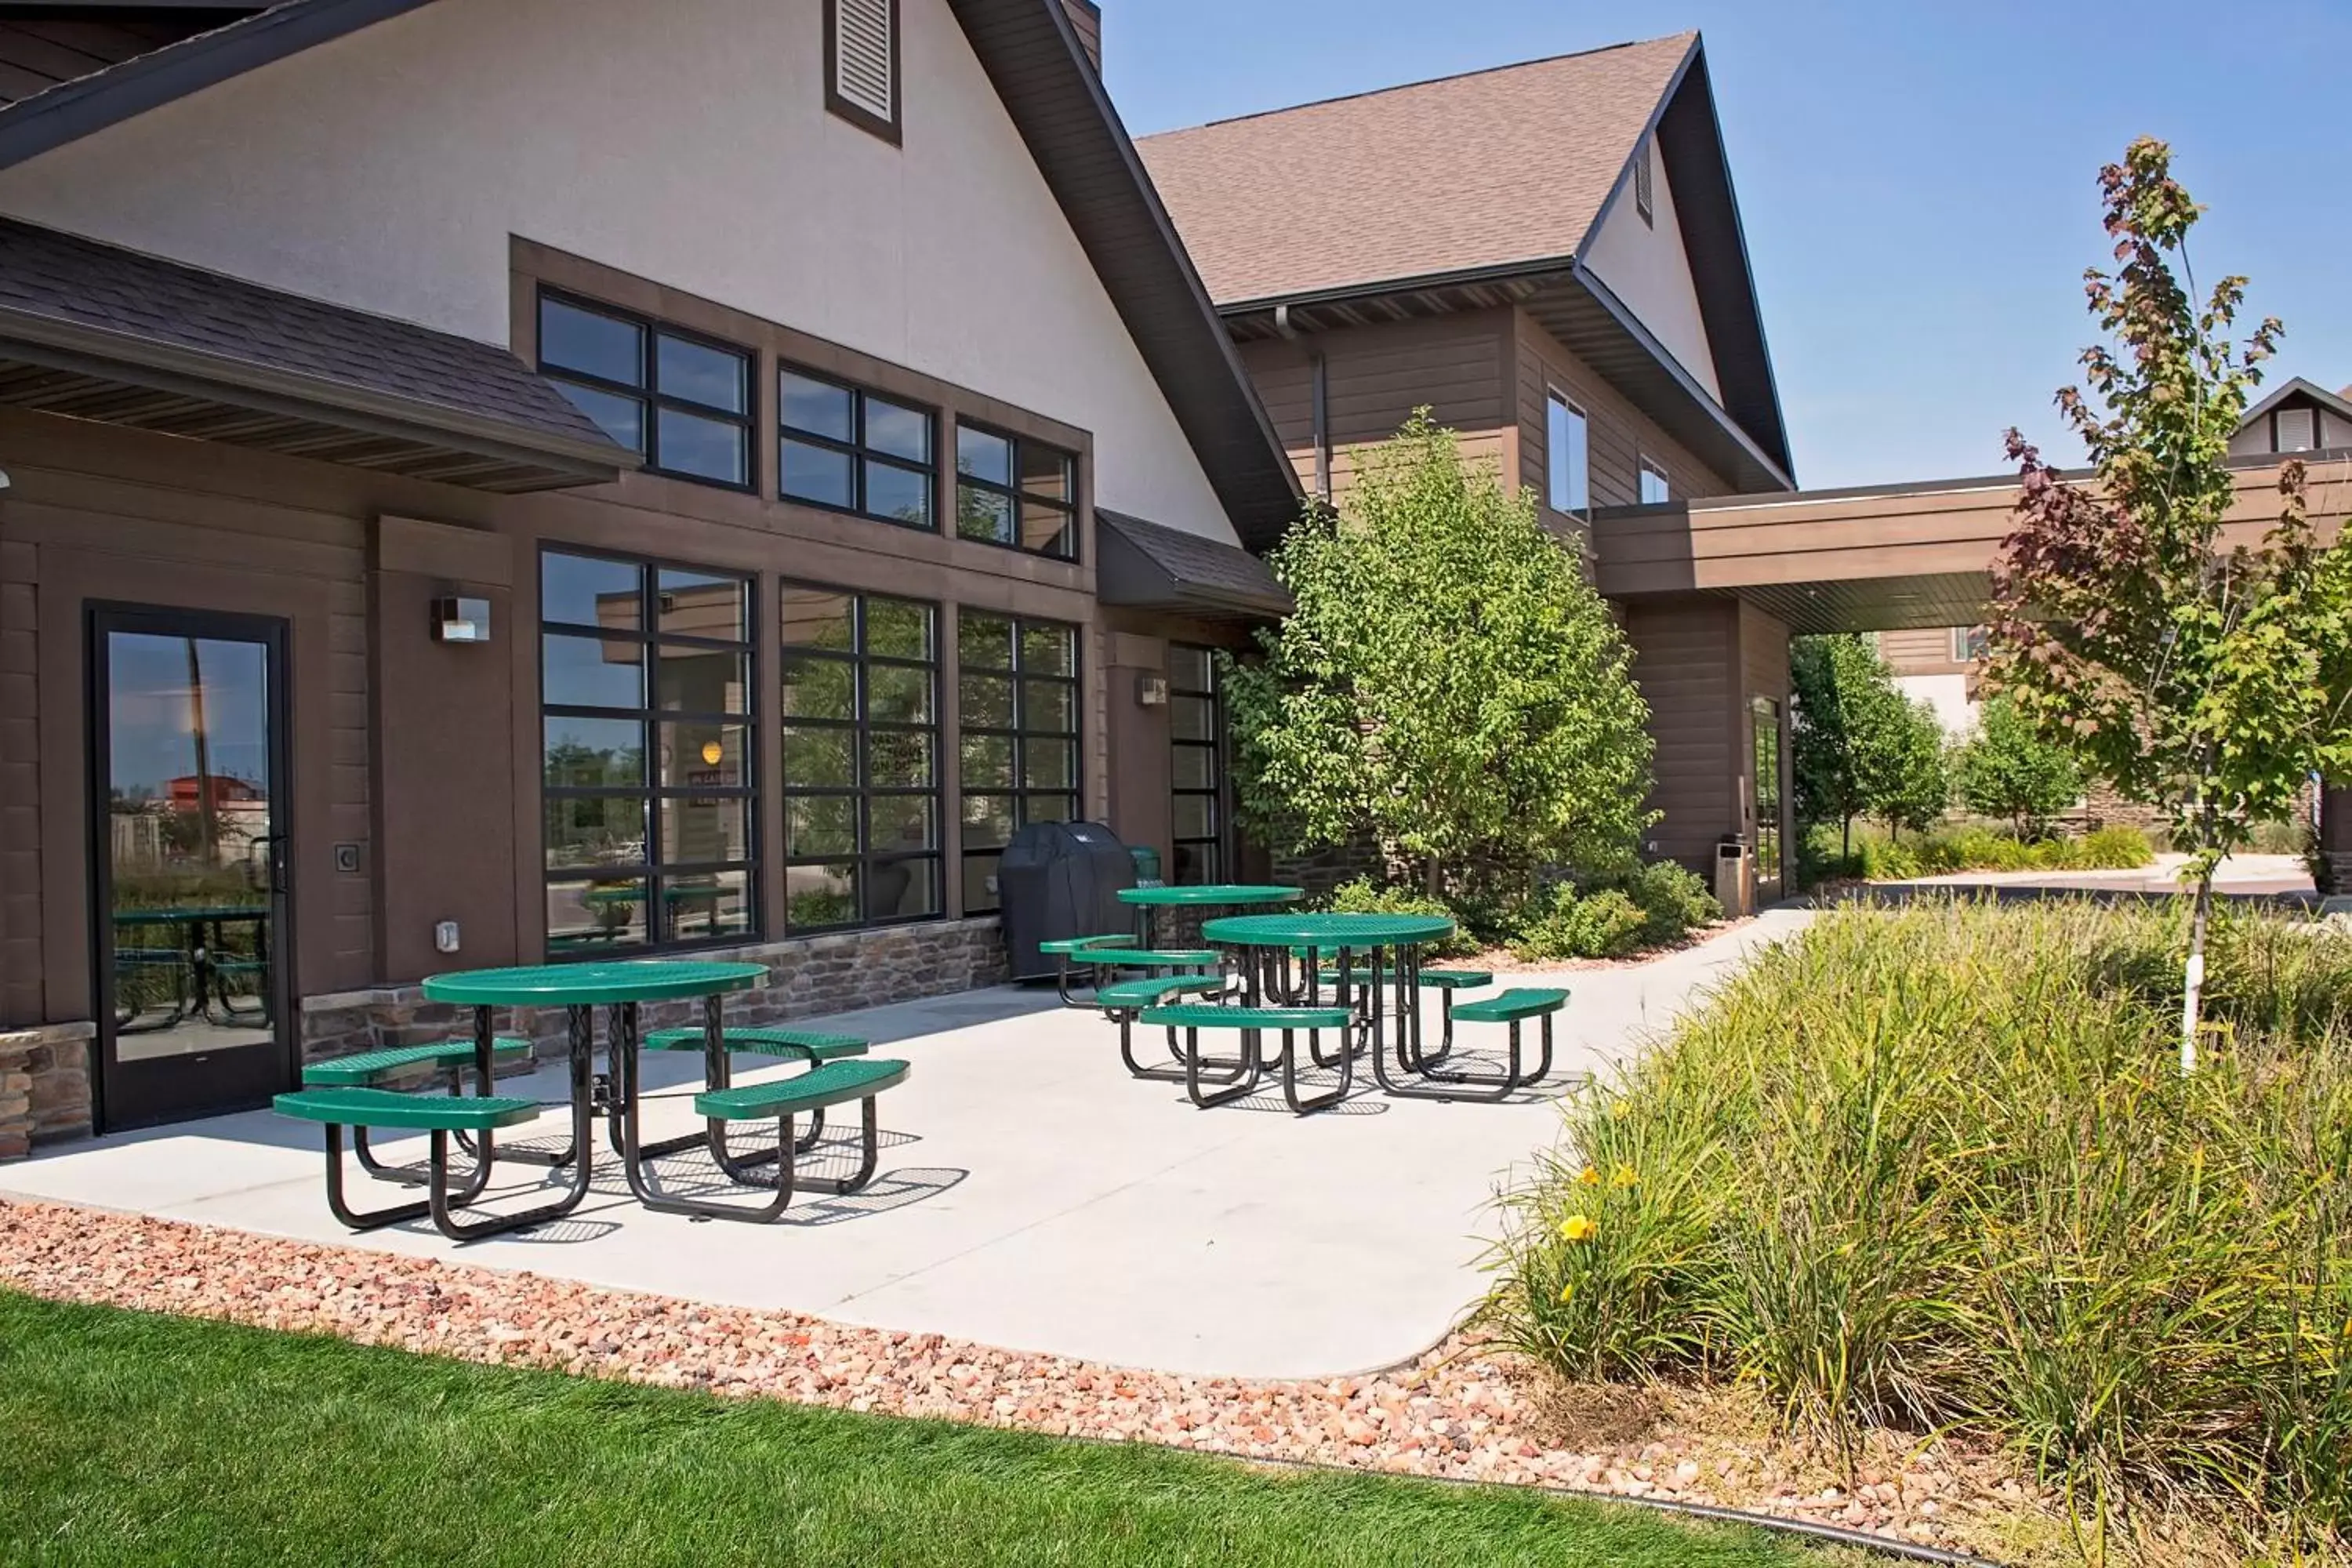 Area and facilities in GrandStay Inn & Suites of Luverne